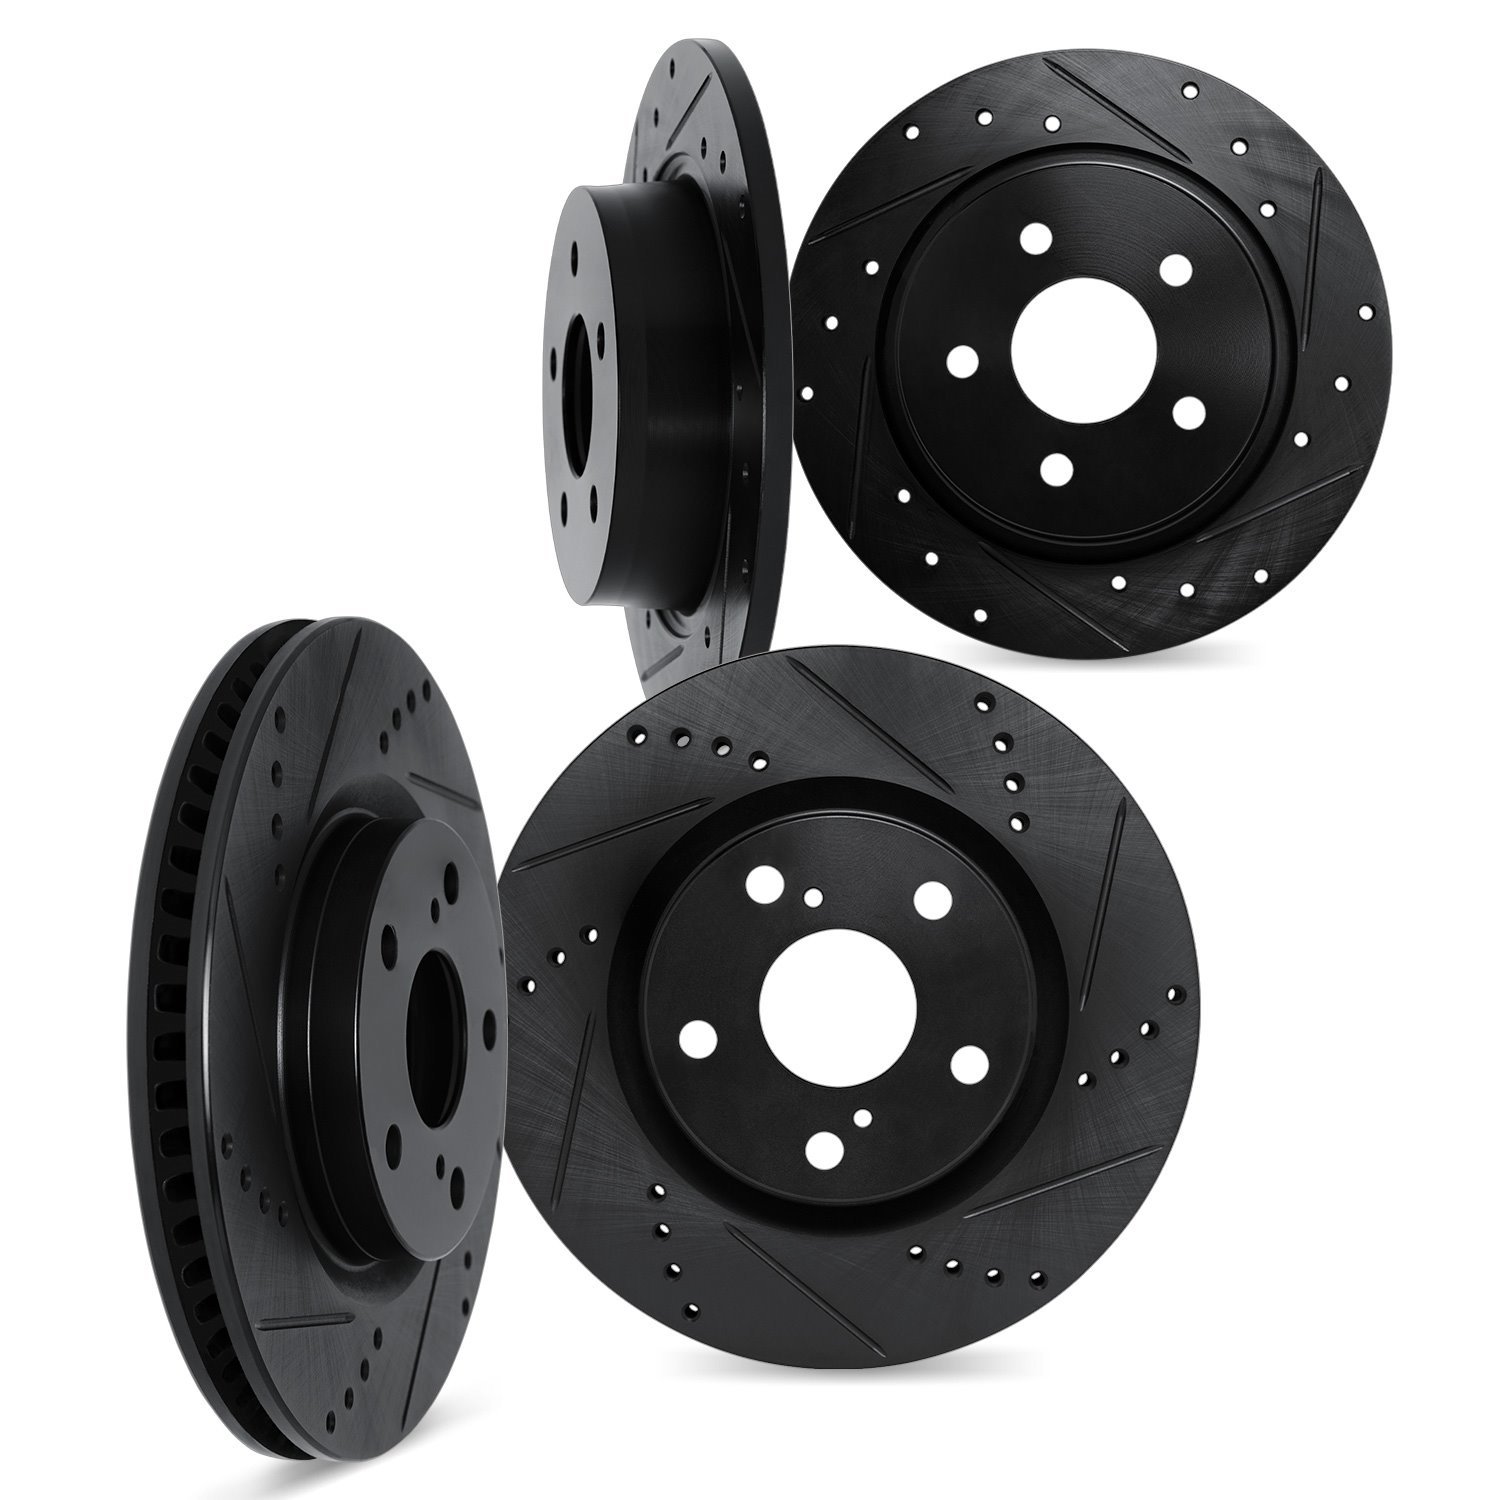 8004-32011 Drilled/Slotted Brake Rotors [Black], Fits Select Mini, Position: Front and Rear